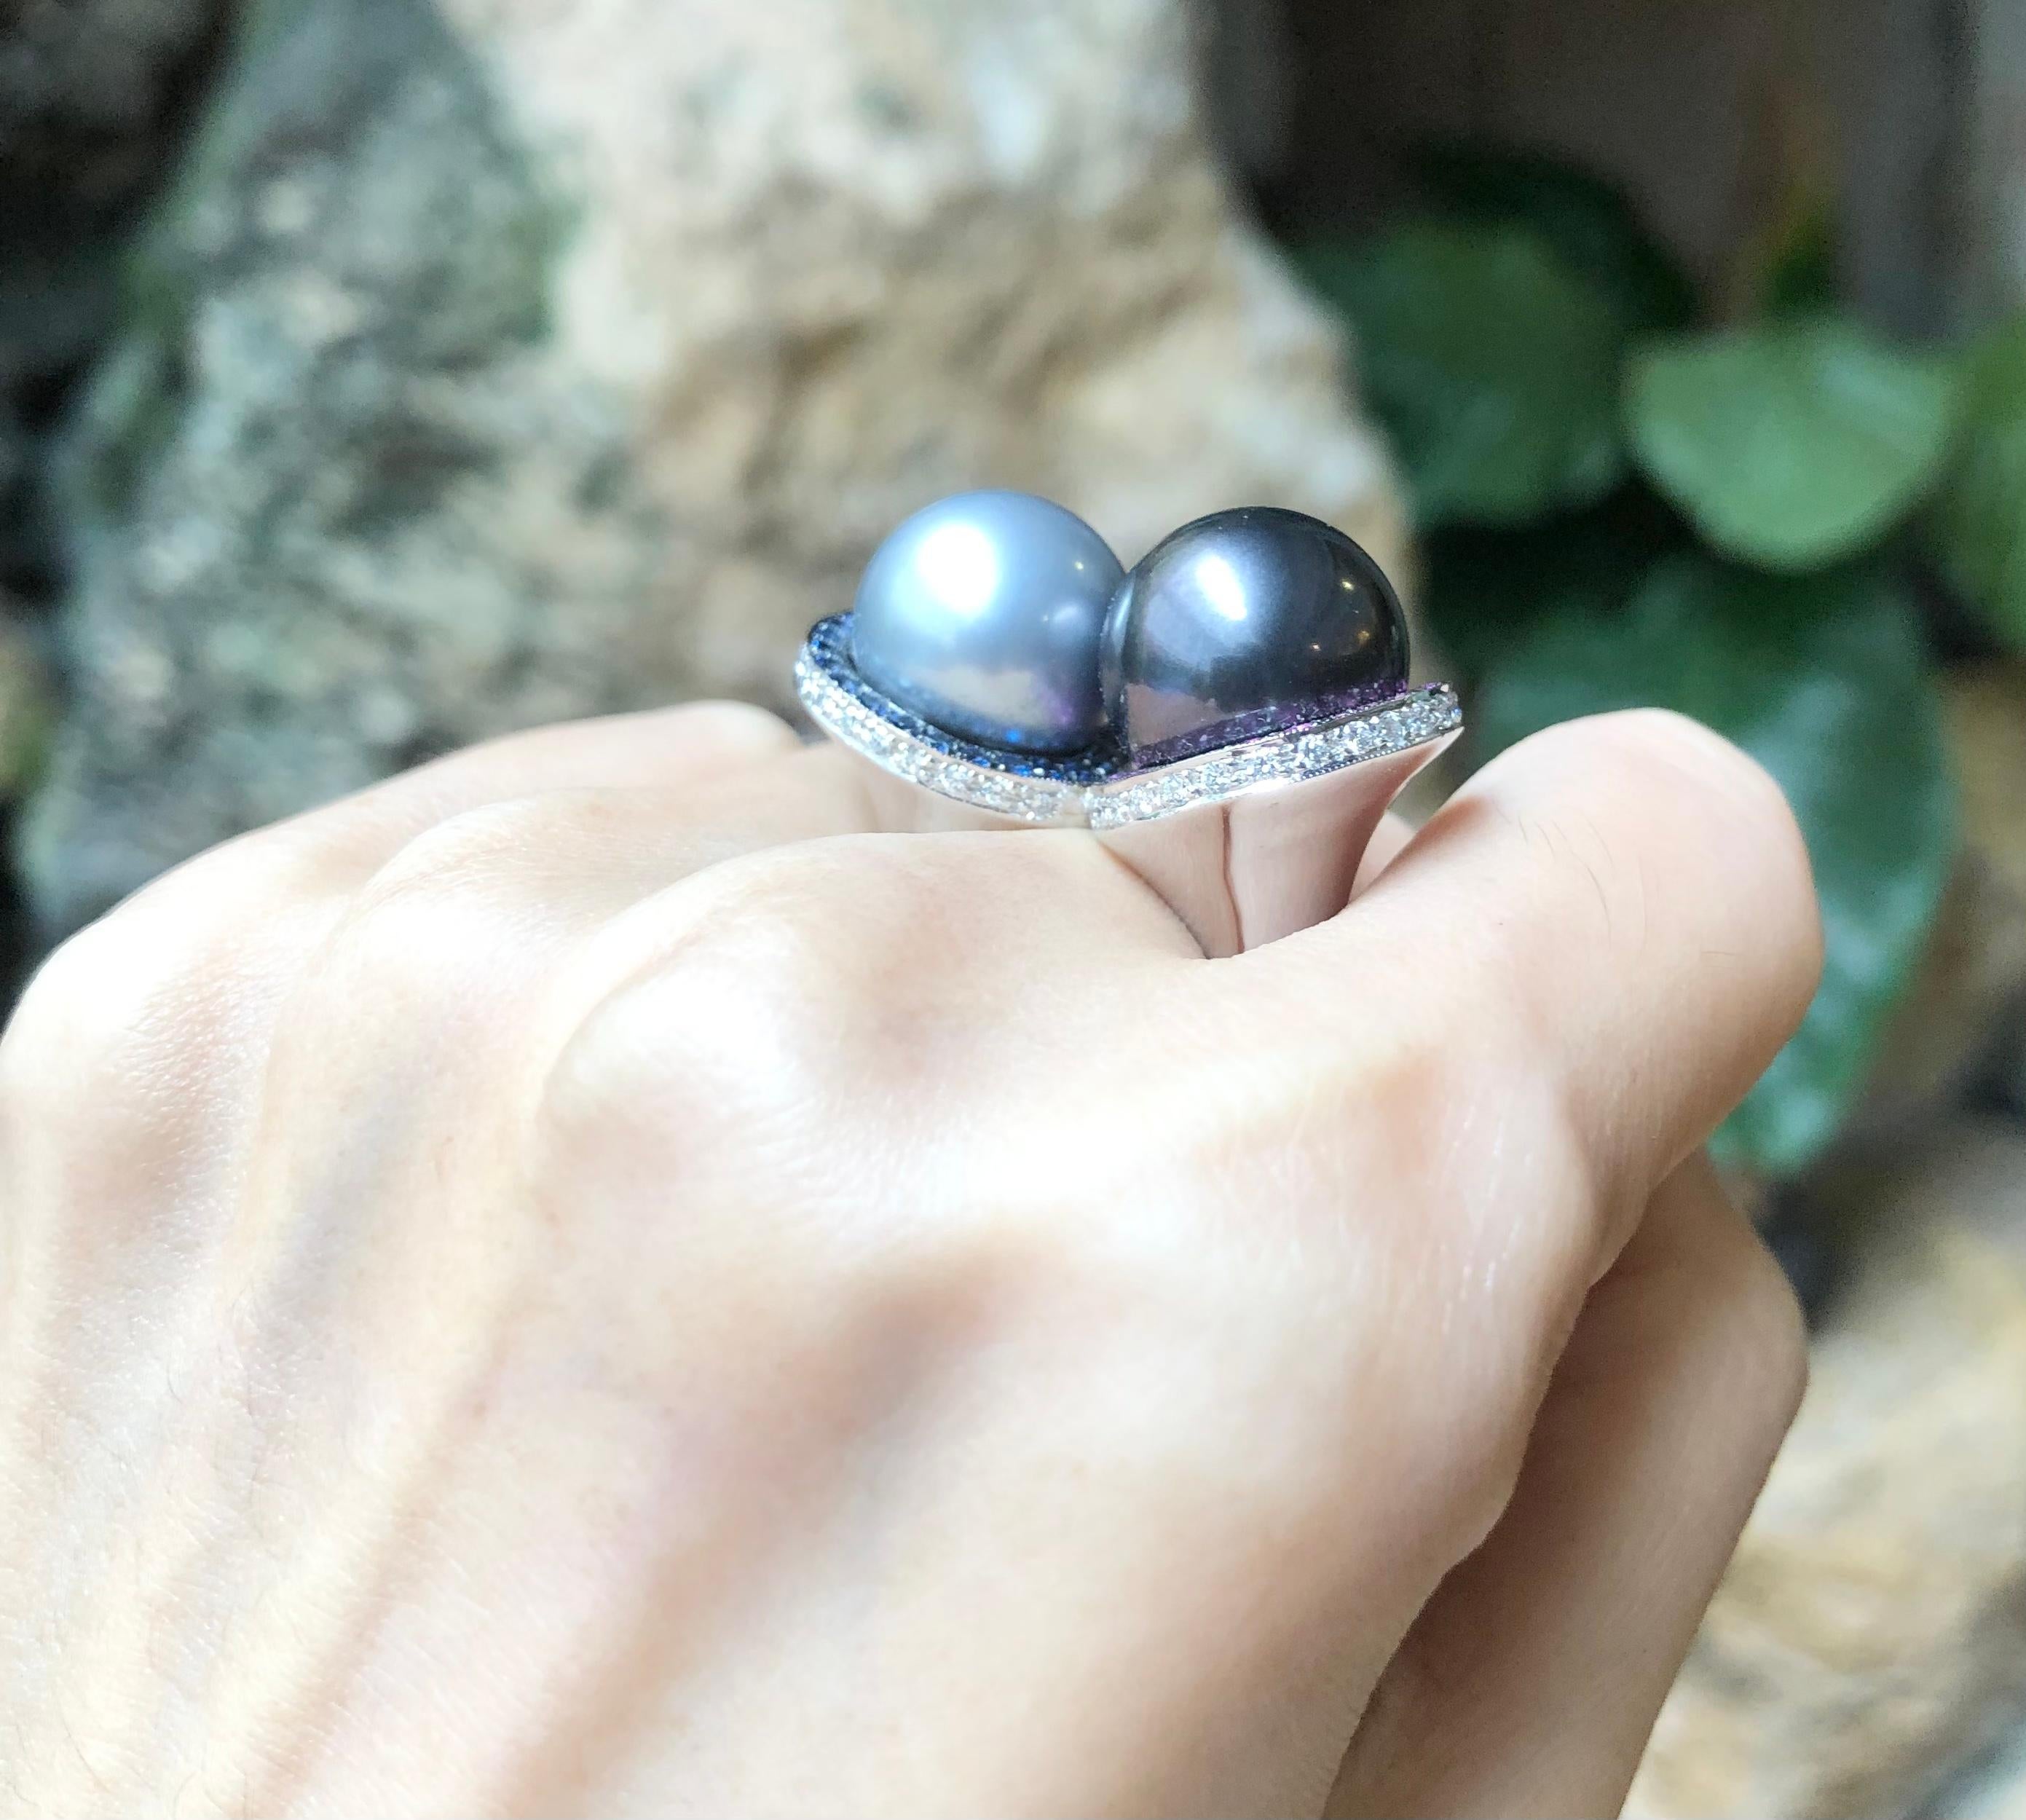 South Sea Pearl with Diamond 0.47 carat, Blue Sapphire 0.57 carat and Pink Sapphire 0.59 carat Ring set in 18 Karat White Gold Settings

Width:  3.5 cm 
Length: 1.7 cm
Ring Size: 53
Total Weight: 23.8 grams

